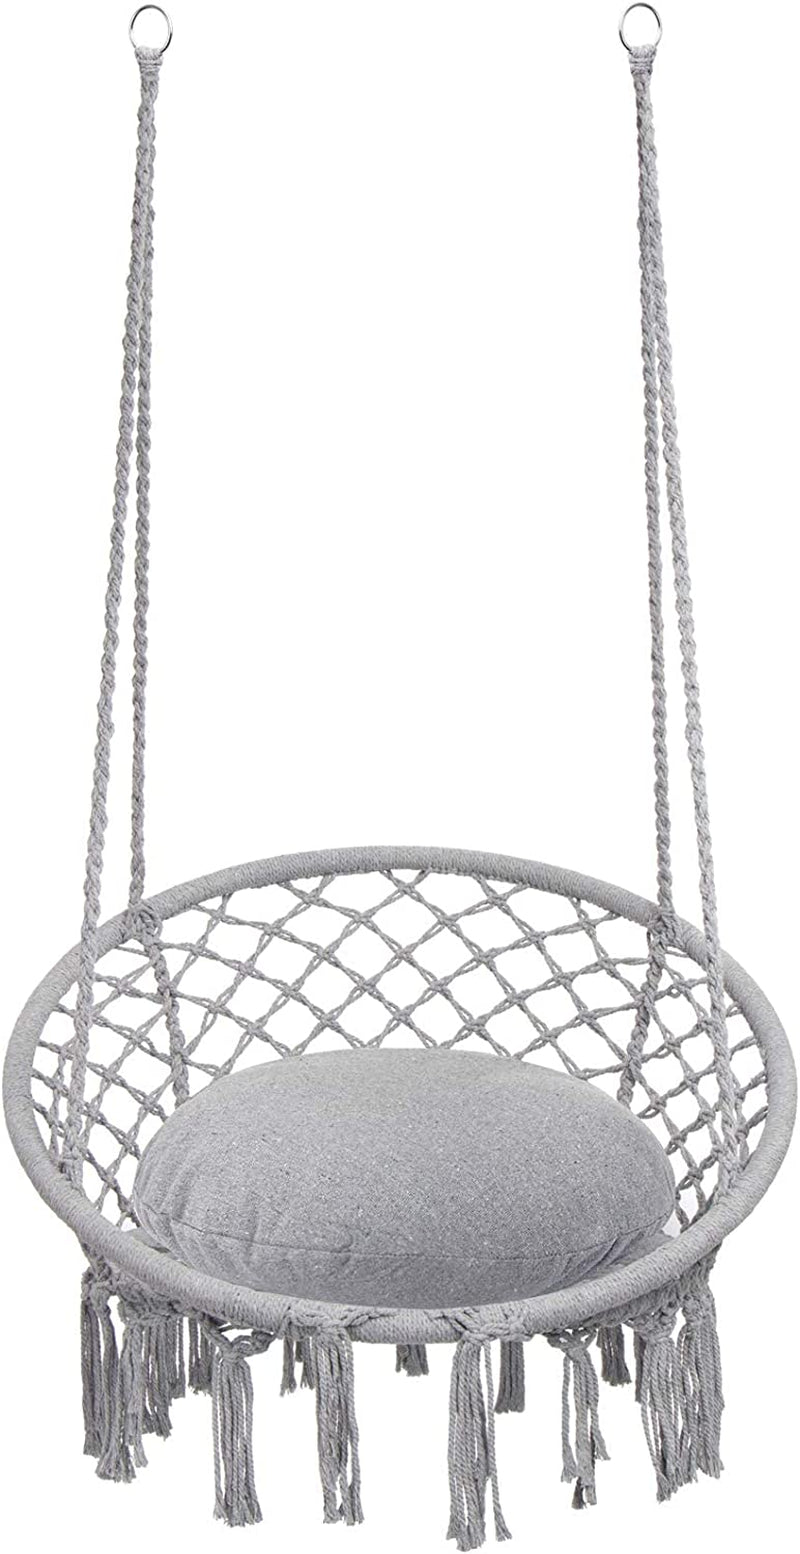 Hammock Chair Macrame Swing, Max 330 Lbs, Hanging Cotton Rope Hammock Swing Chair for Indoor and Outdoor Use, Light Grey